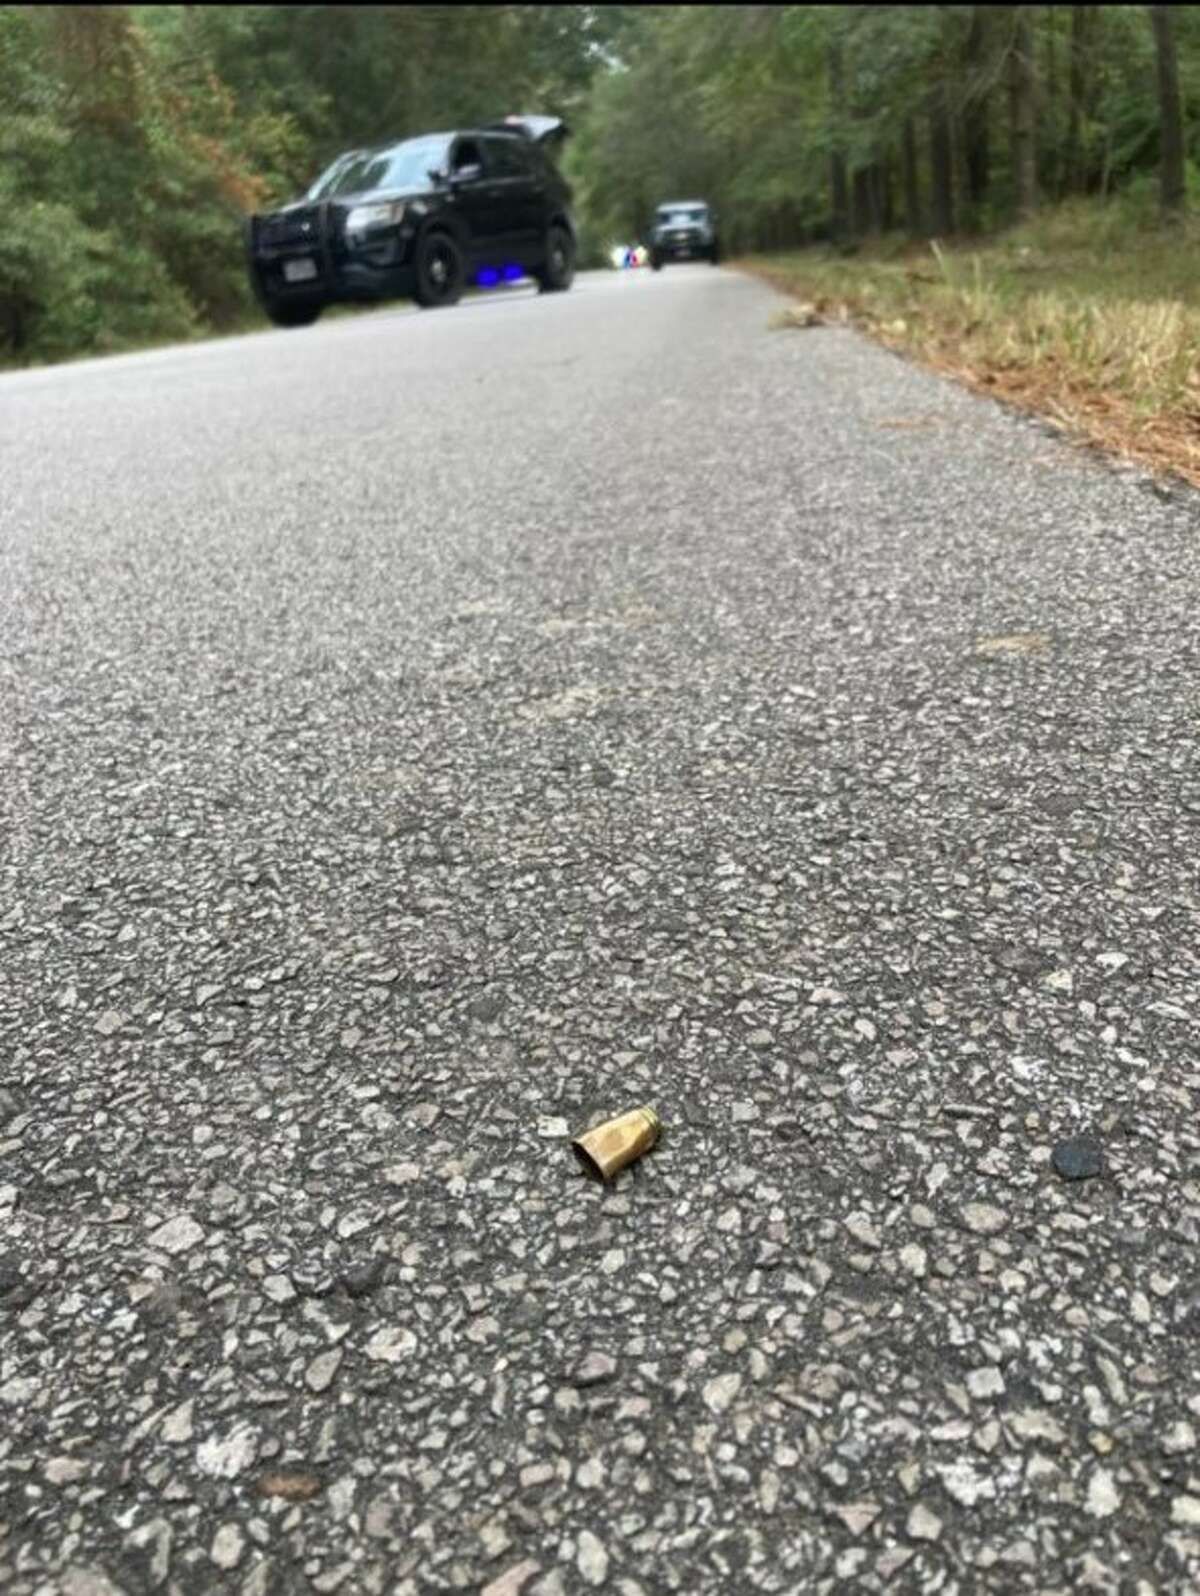 A bullet casing found on the ground by  Montgomery County Precinct Four Constable's Office officers.